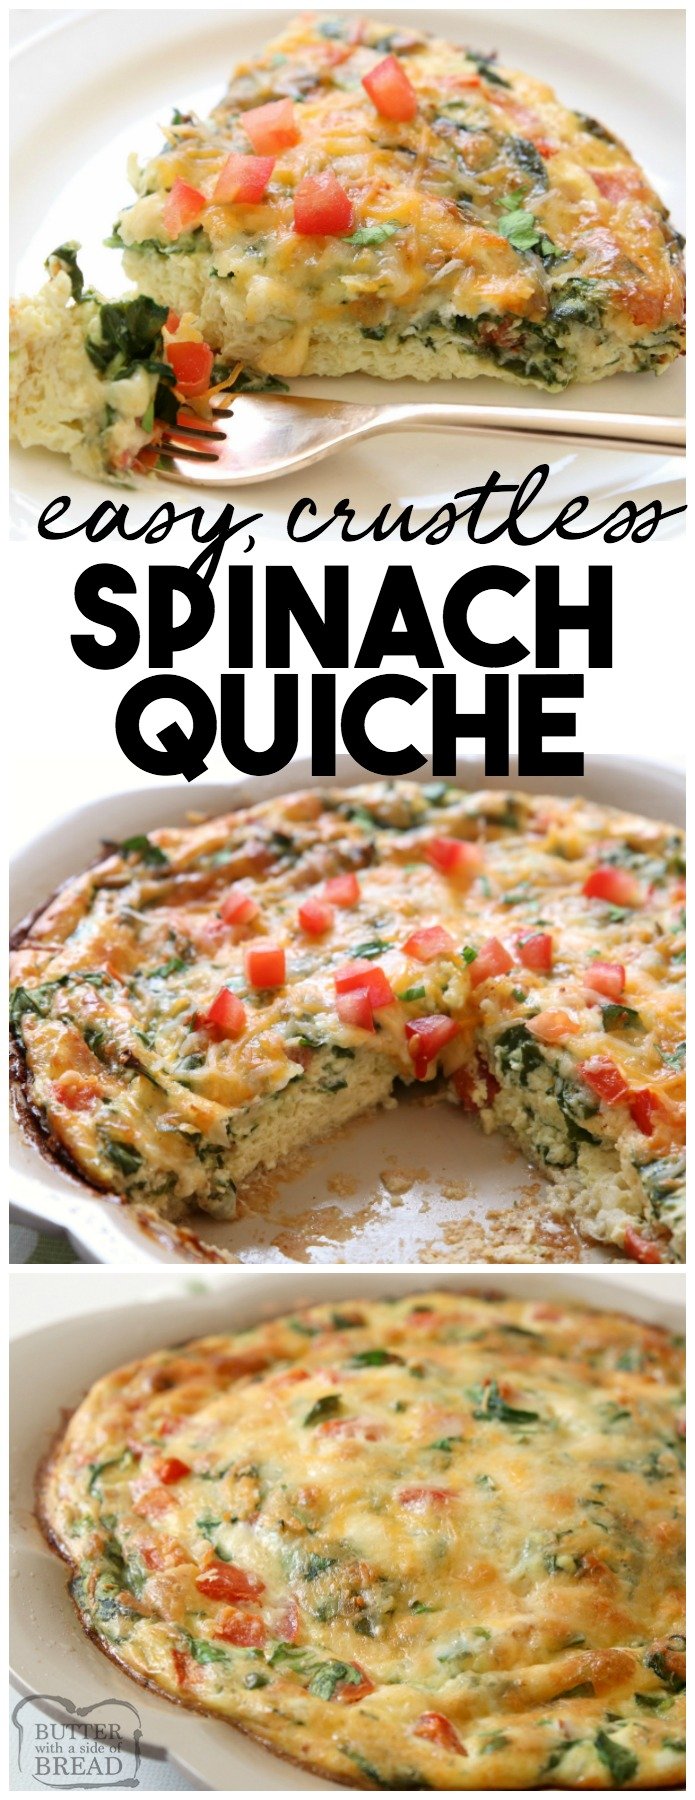 Crustless Spinach Quiche recipe that's quick & easy and tastes absolutely delicious! Packed with protein from milk, cheese and eggs, this easy quiche recipe also has spinach and fresh tomatoes. Serving crustless quiche makes prep so much easier, plus the quiche is healthier for you. Easy #spinach #quiche #recipe from Butter With A Side of Bread #crustless #food #breakfast #brunch #protein #meatless